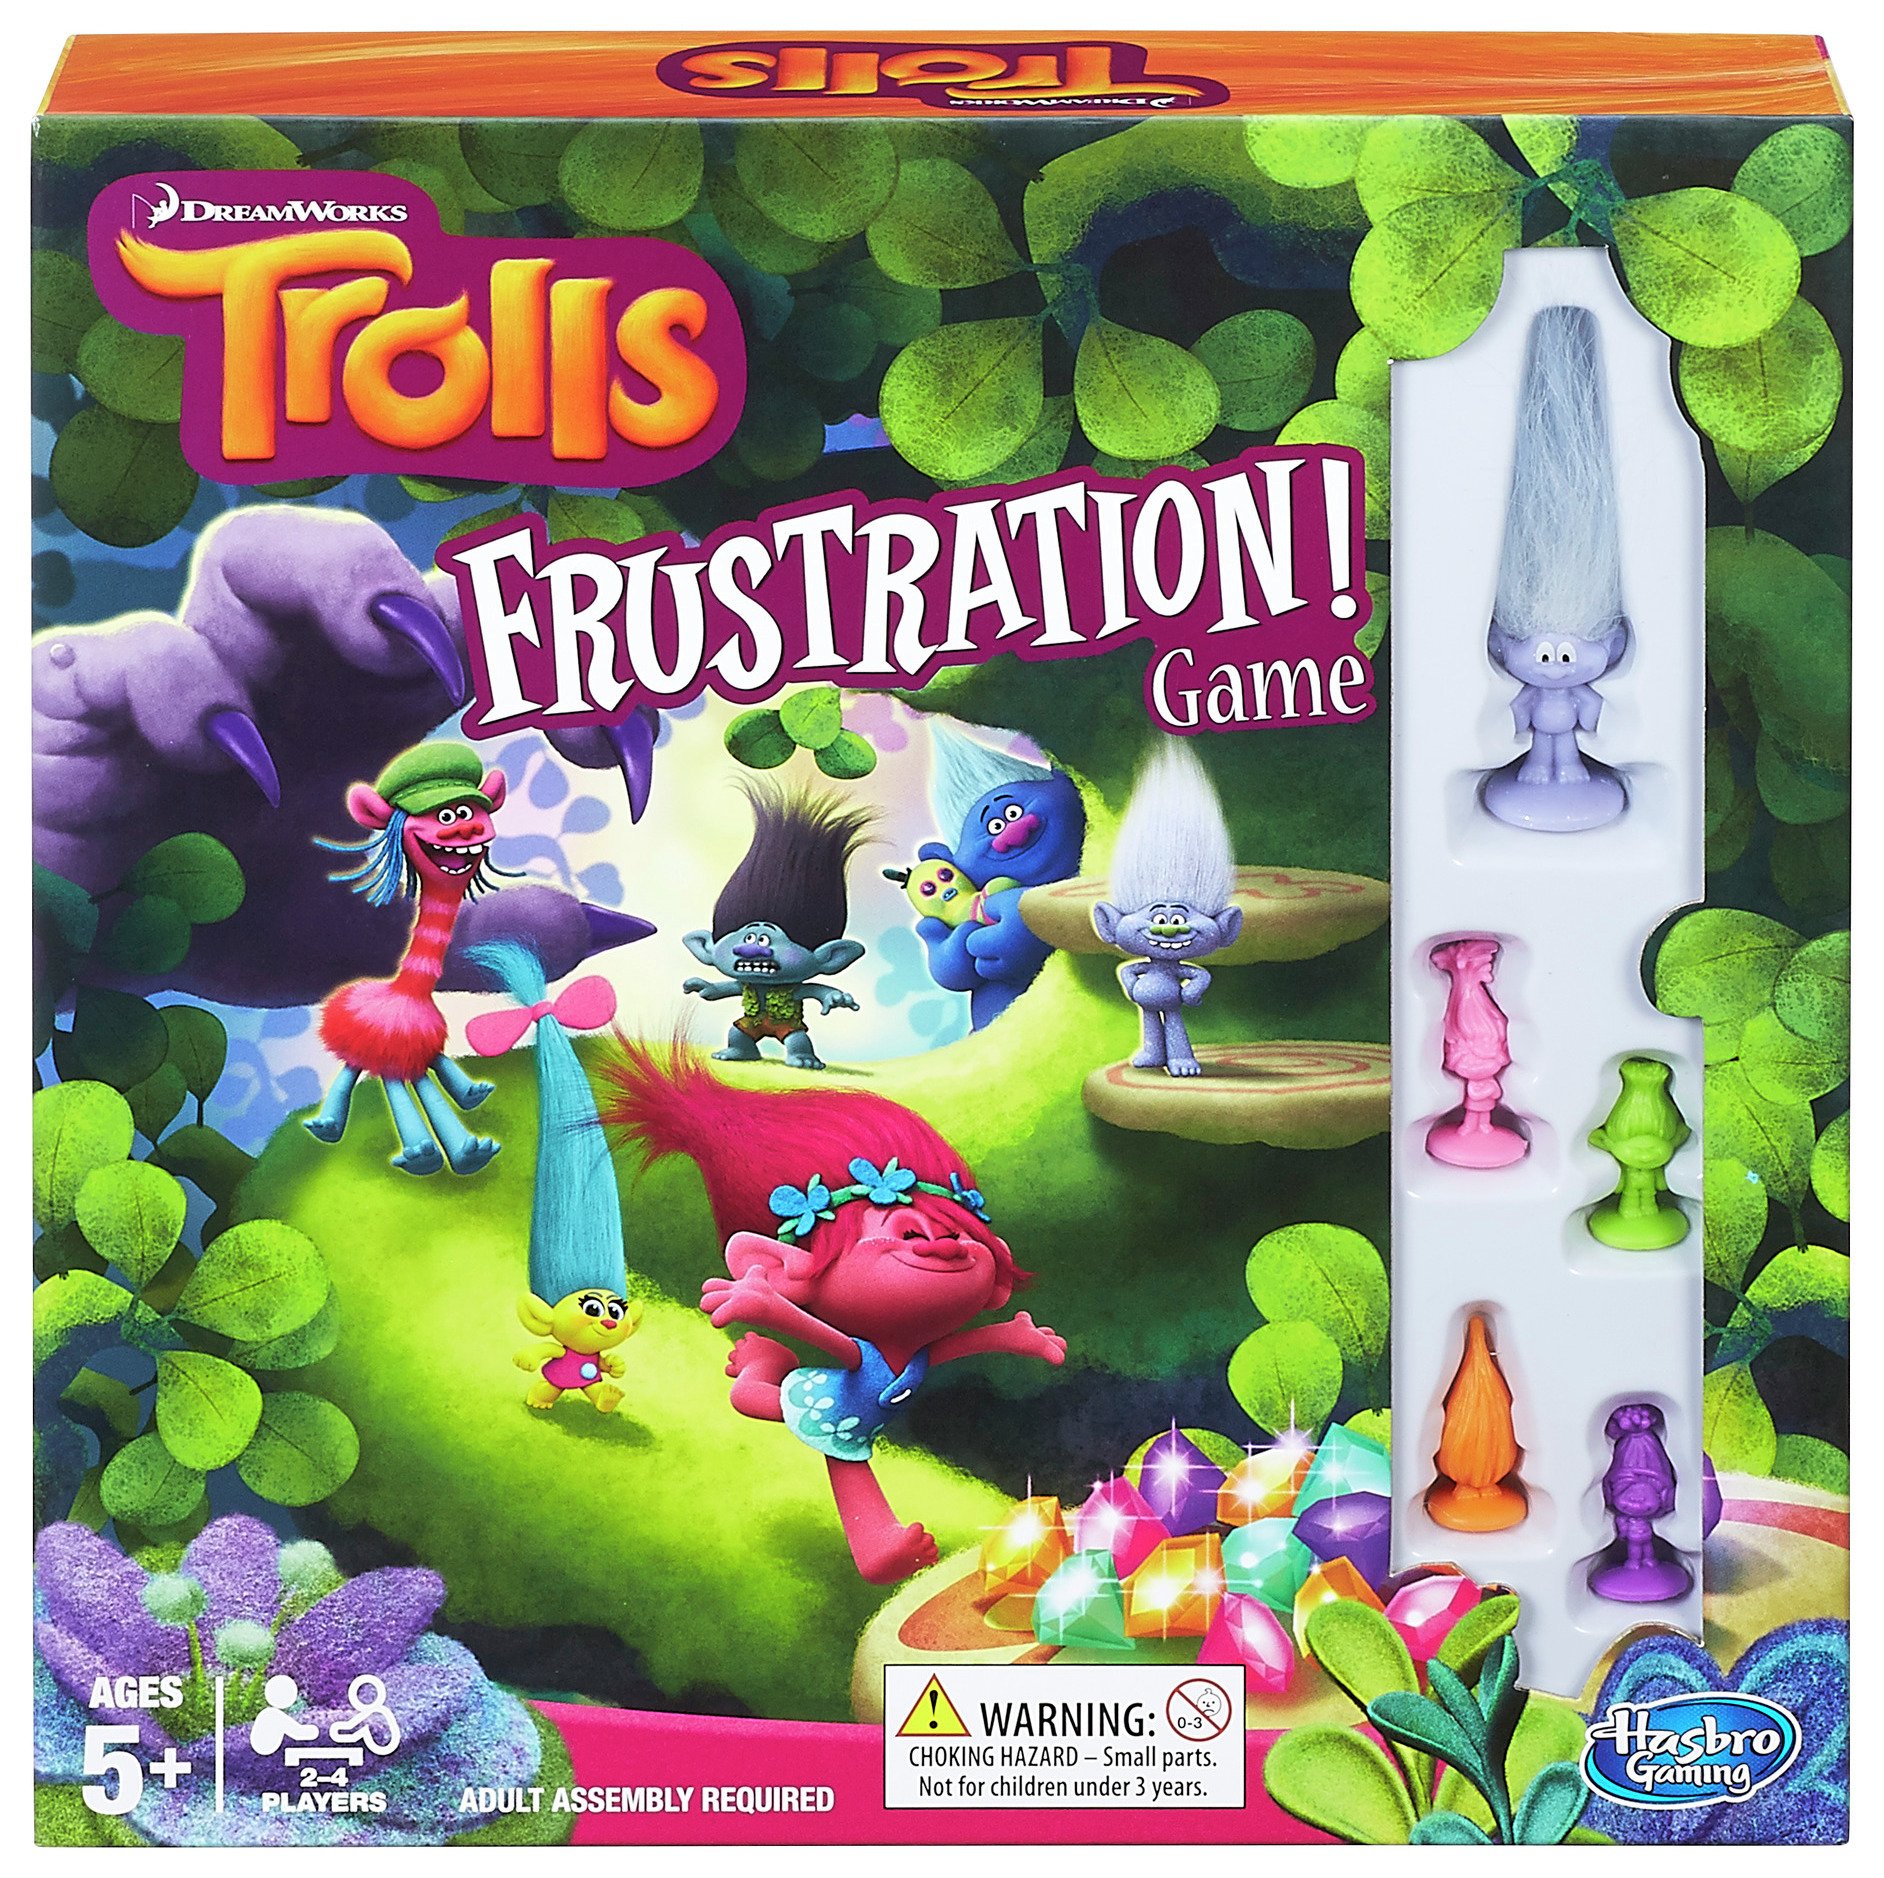 Trolls Frustration Game From Hasbro Gaming